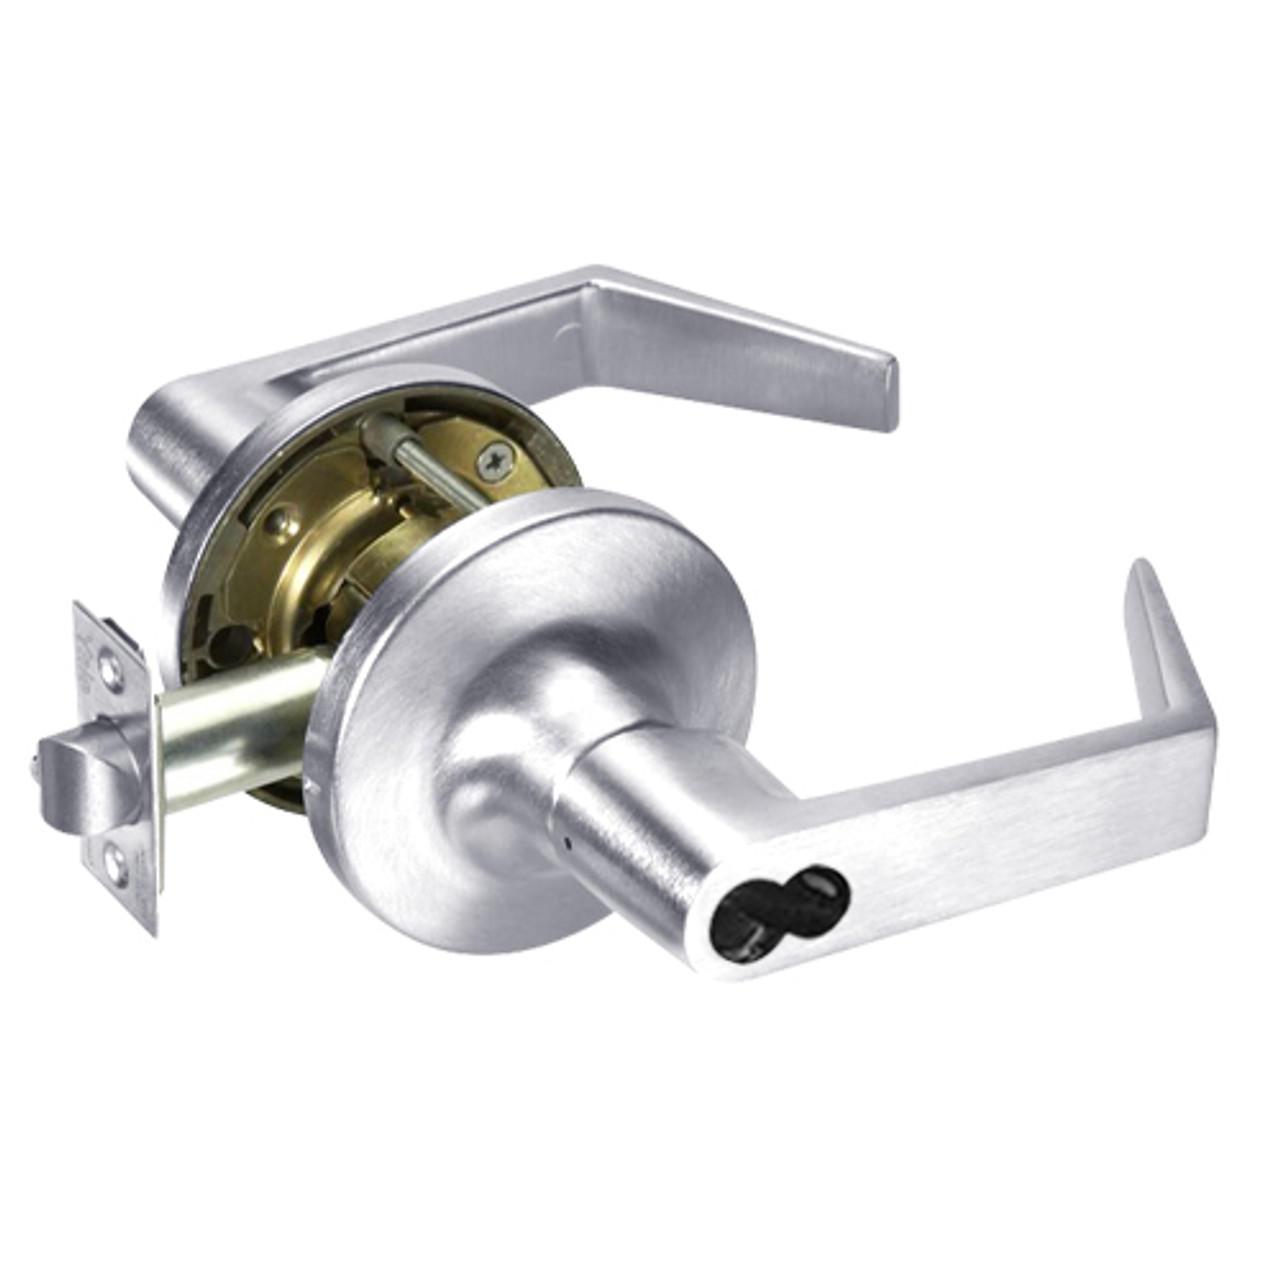 B-AU5417LN-625 Yale 5400LN Series Double Cylinder Apartment or Exit Cylindrical Locks with Augusta Lever Prepped for SFIC in Bright Chrome